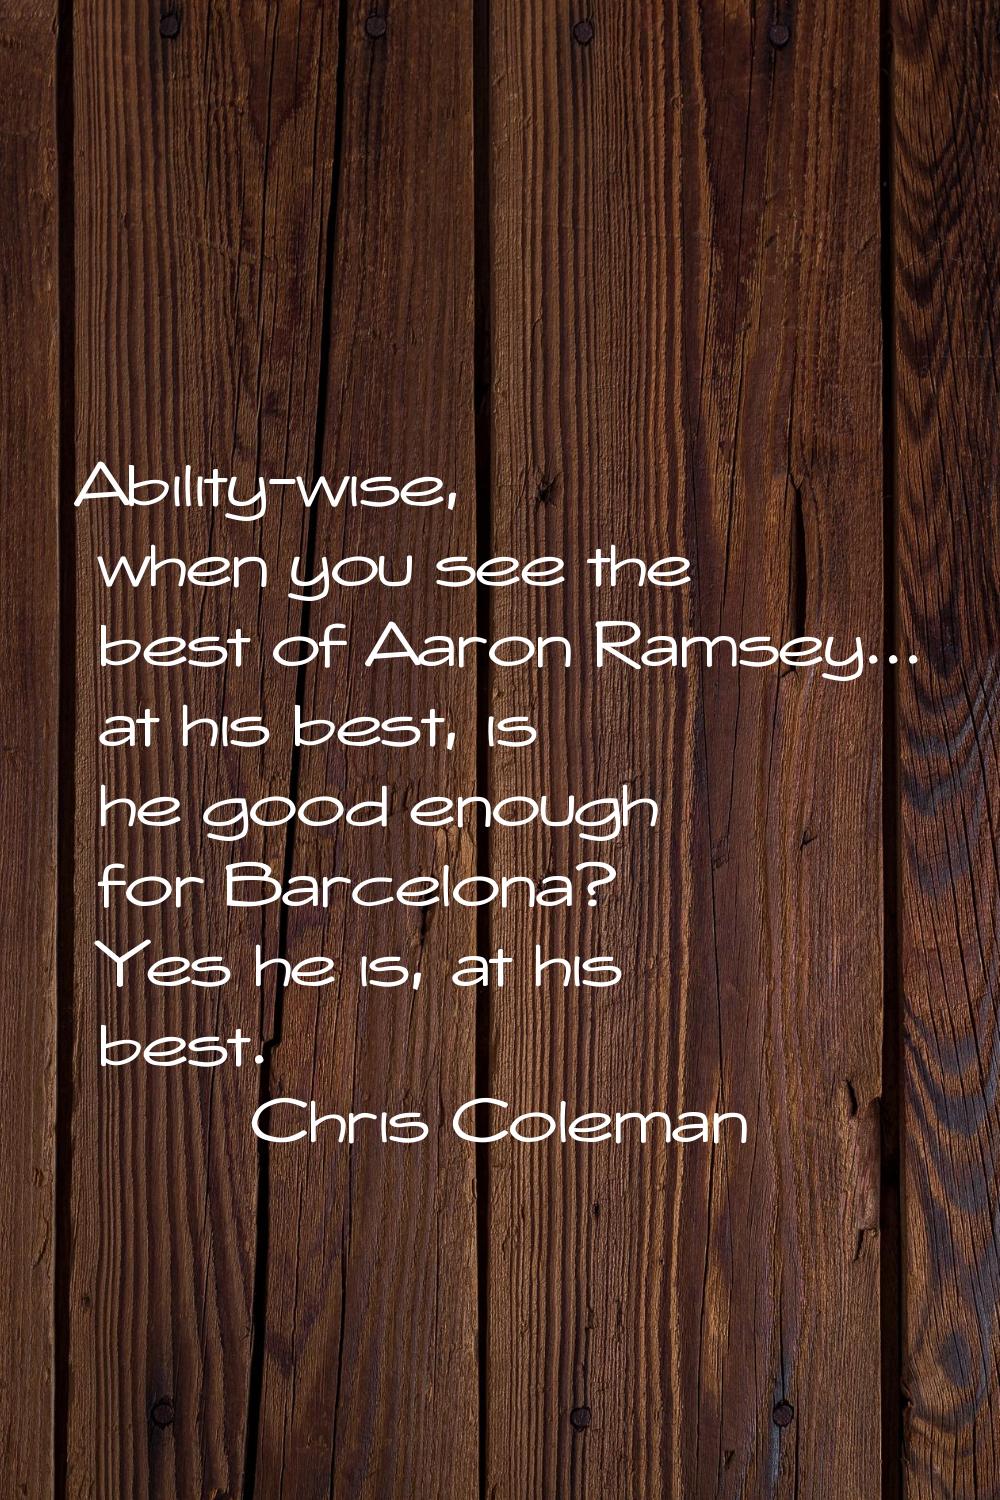 Ability-wise, when you see the best of Aaron Ramsey... at his best, is he good enough for Barcelona